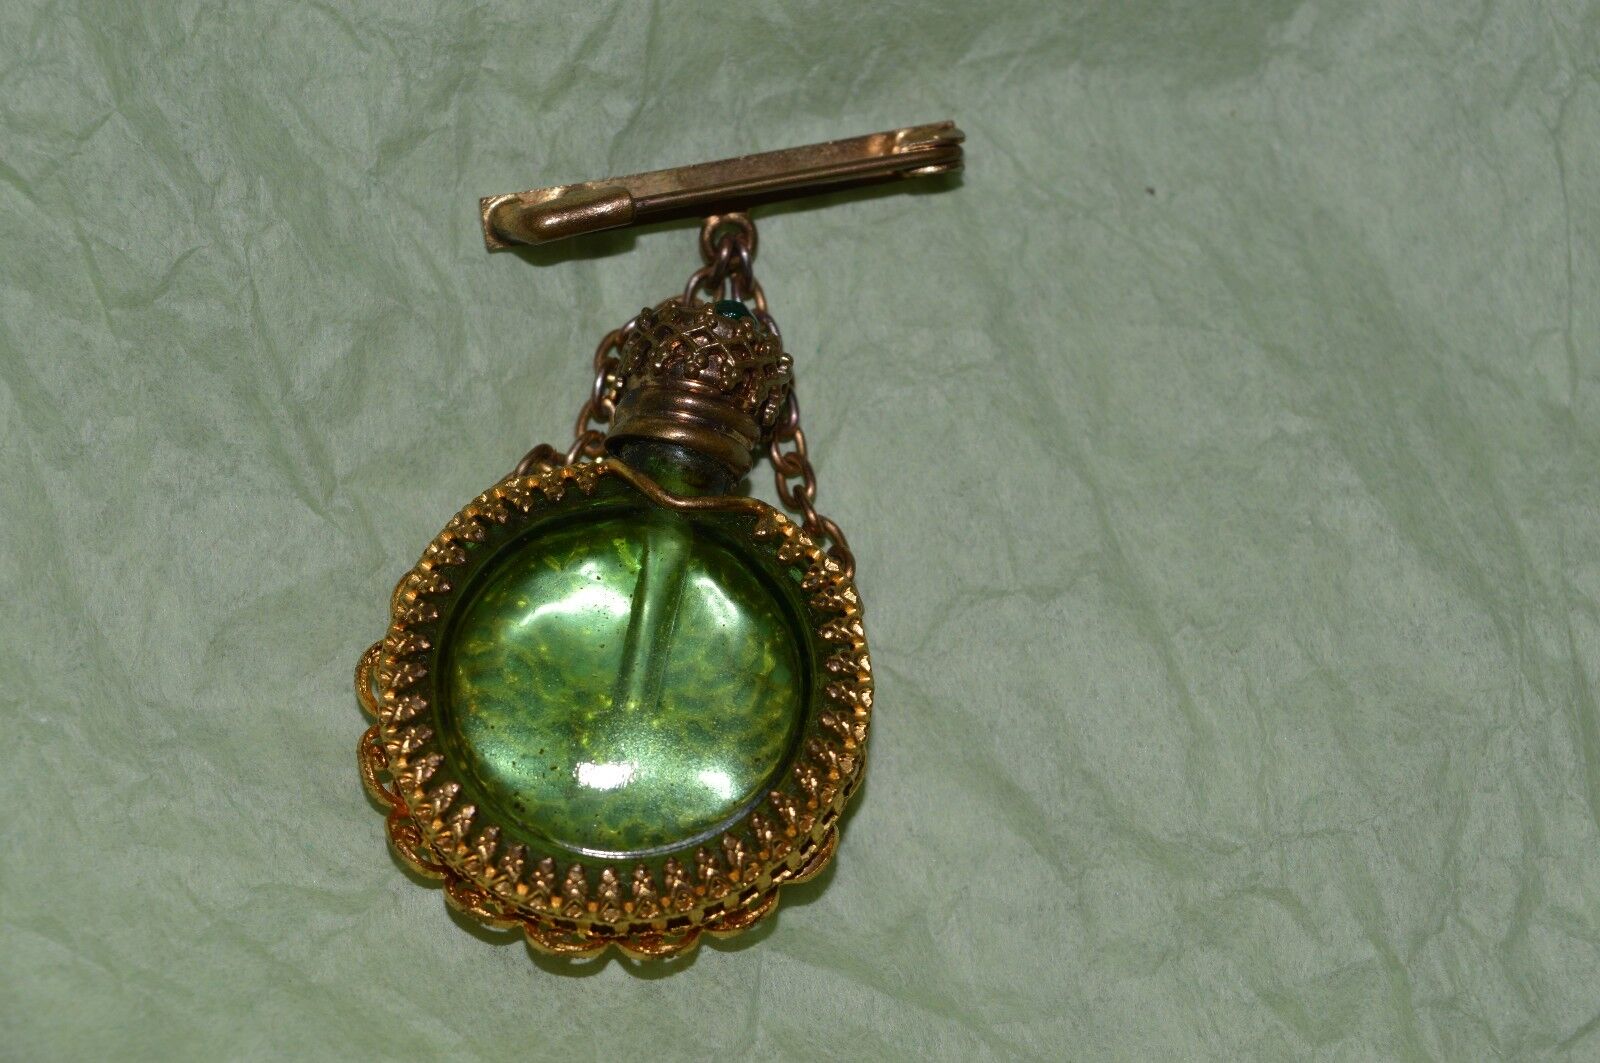 Antique Filigree perfume bottle gold filigree with green stone top & glass